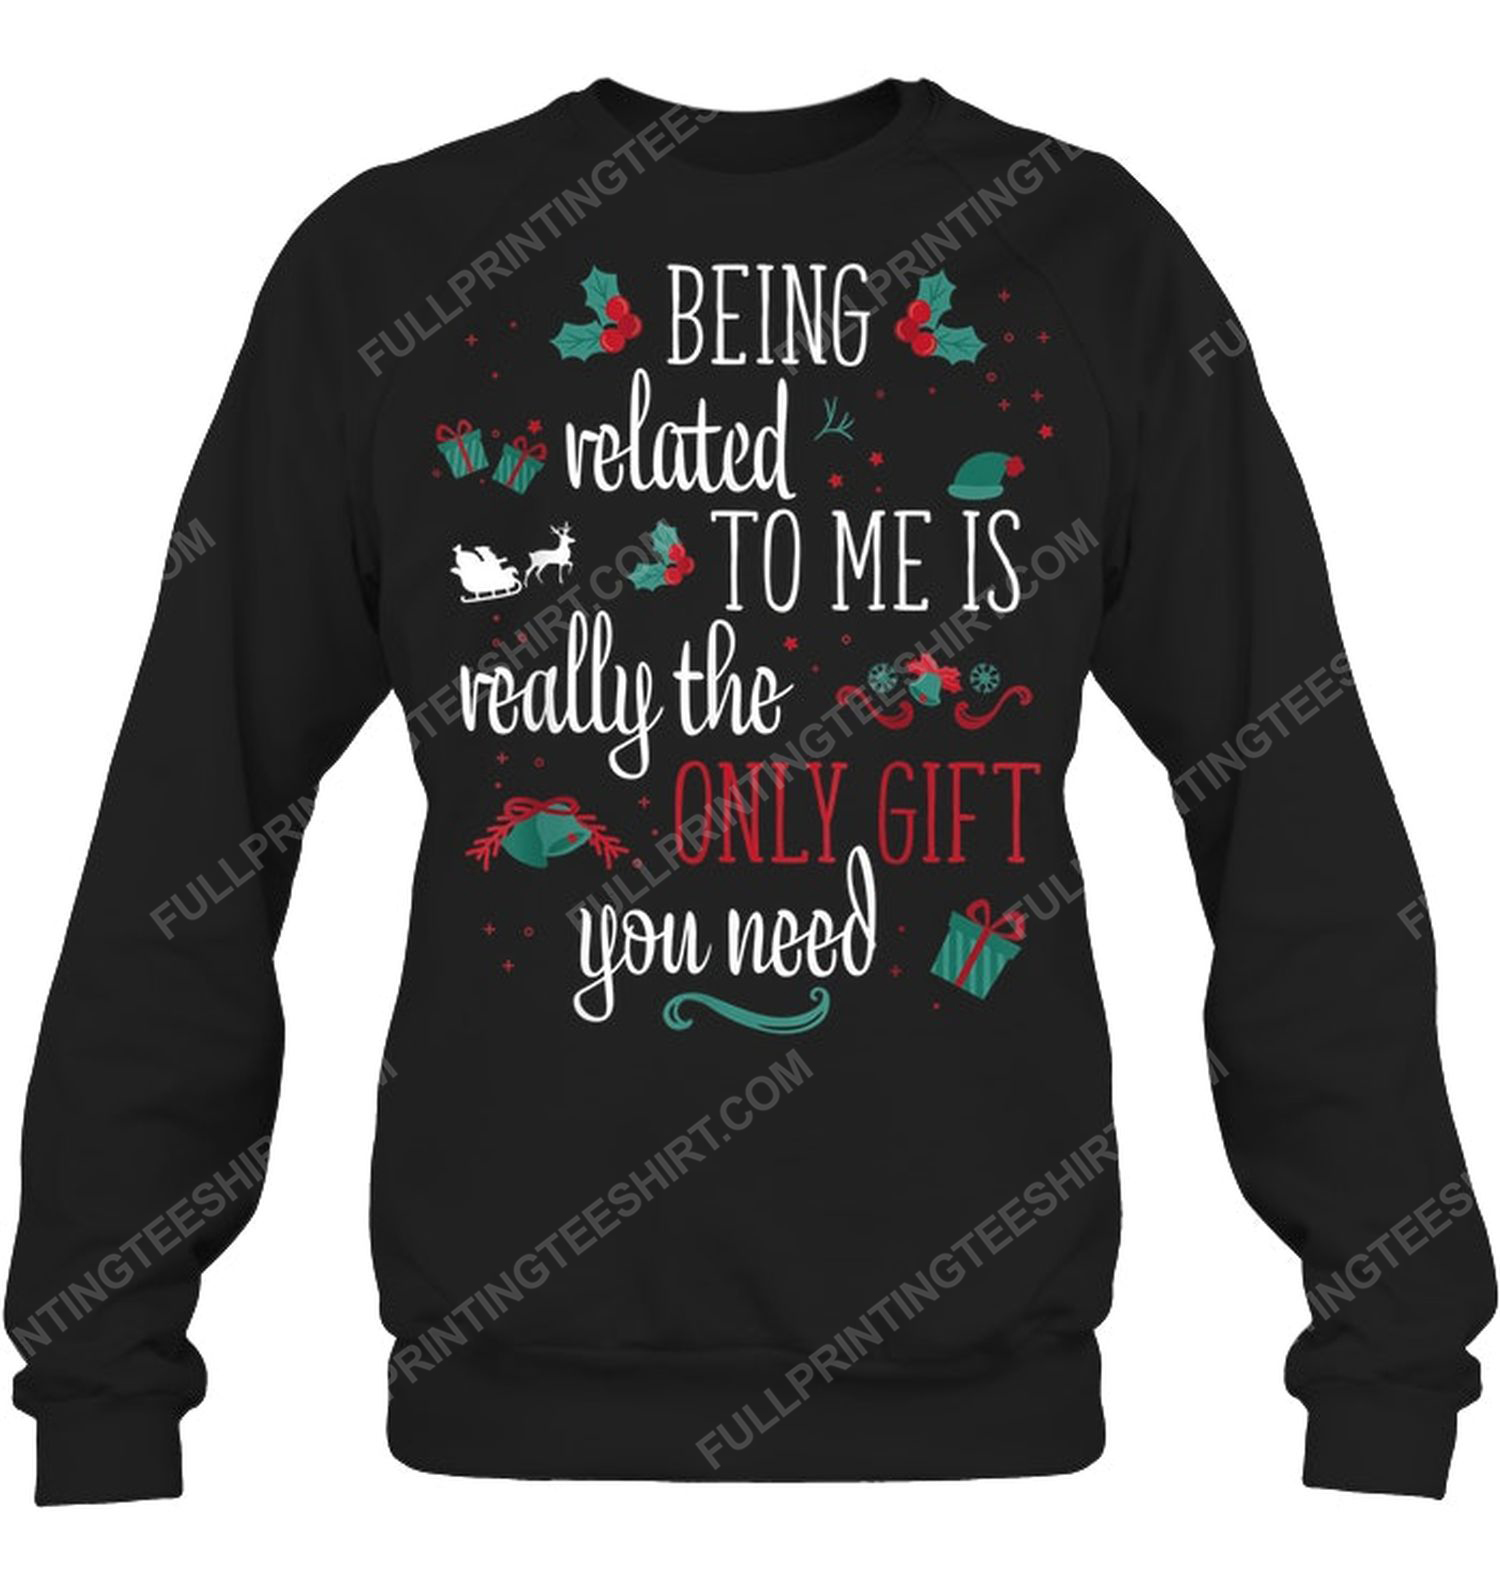 Being related to me is really the only gift you need sweatshirt